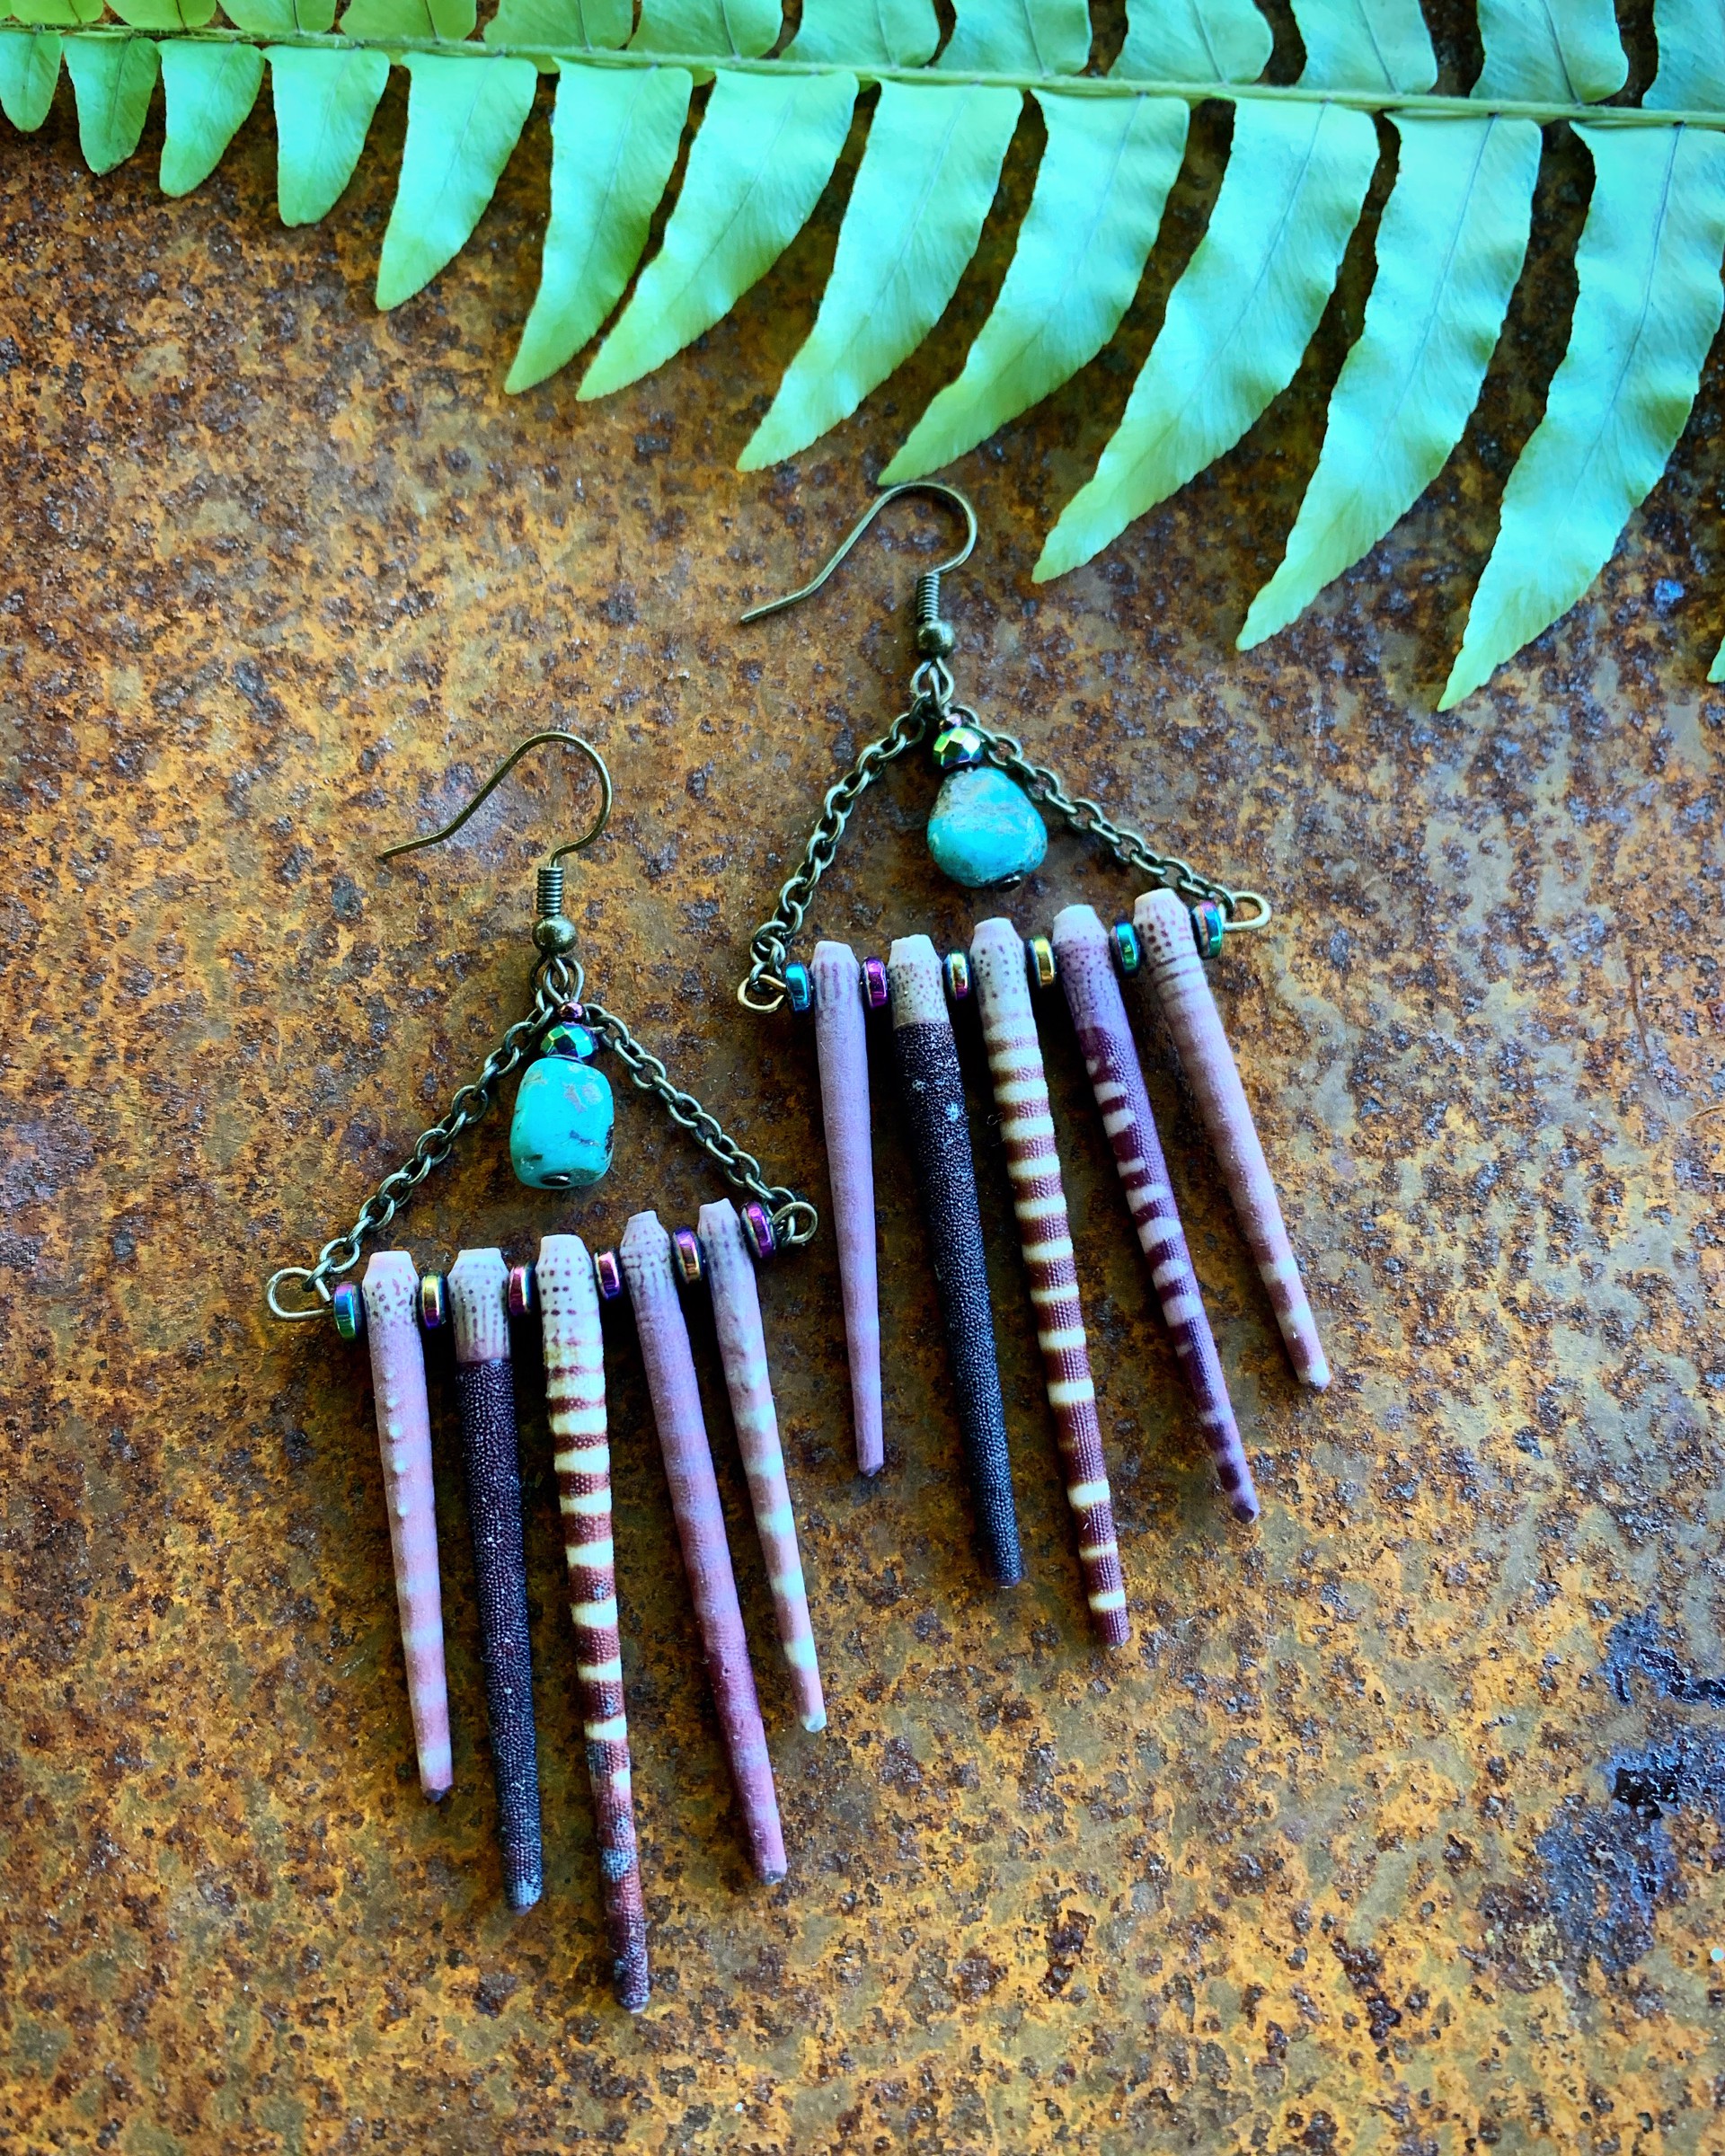 K661 Sea Urchin Spine Earrings with Turquoise by Kelly Ormsby